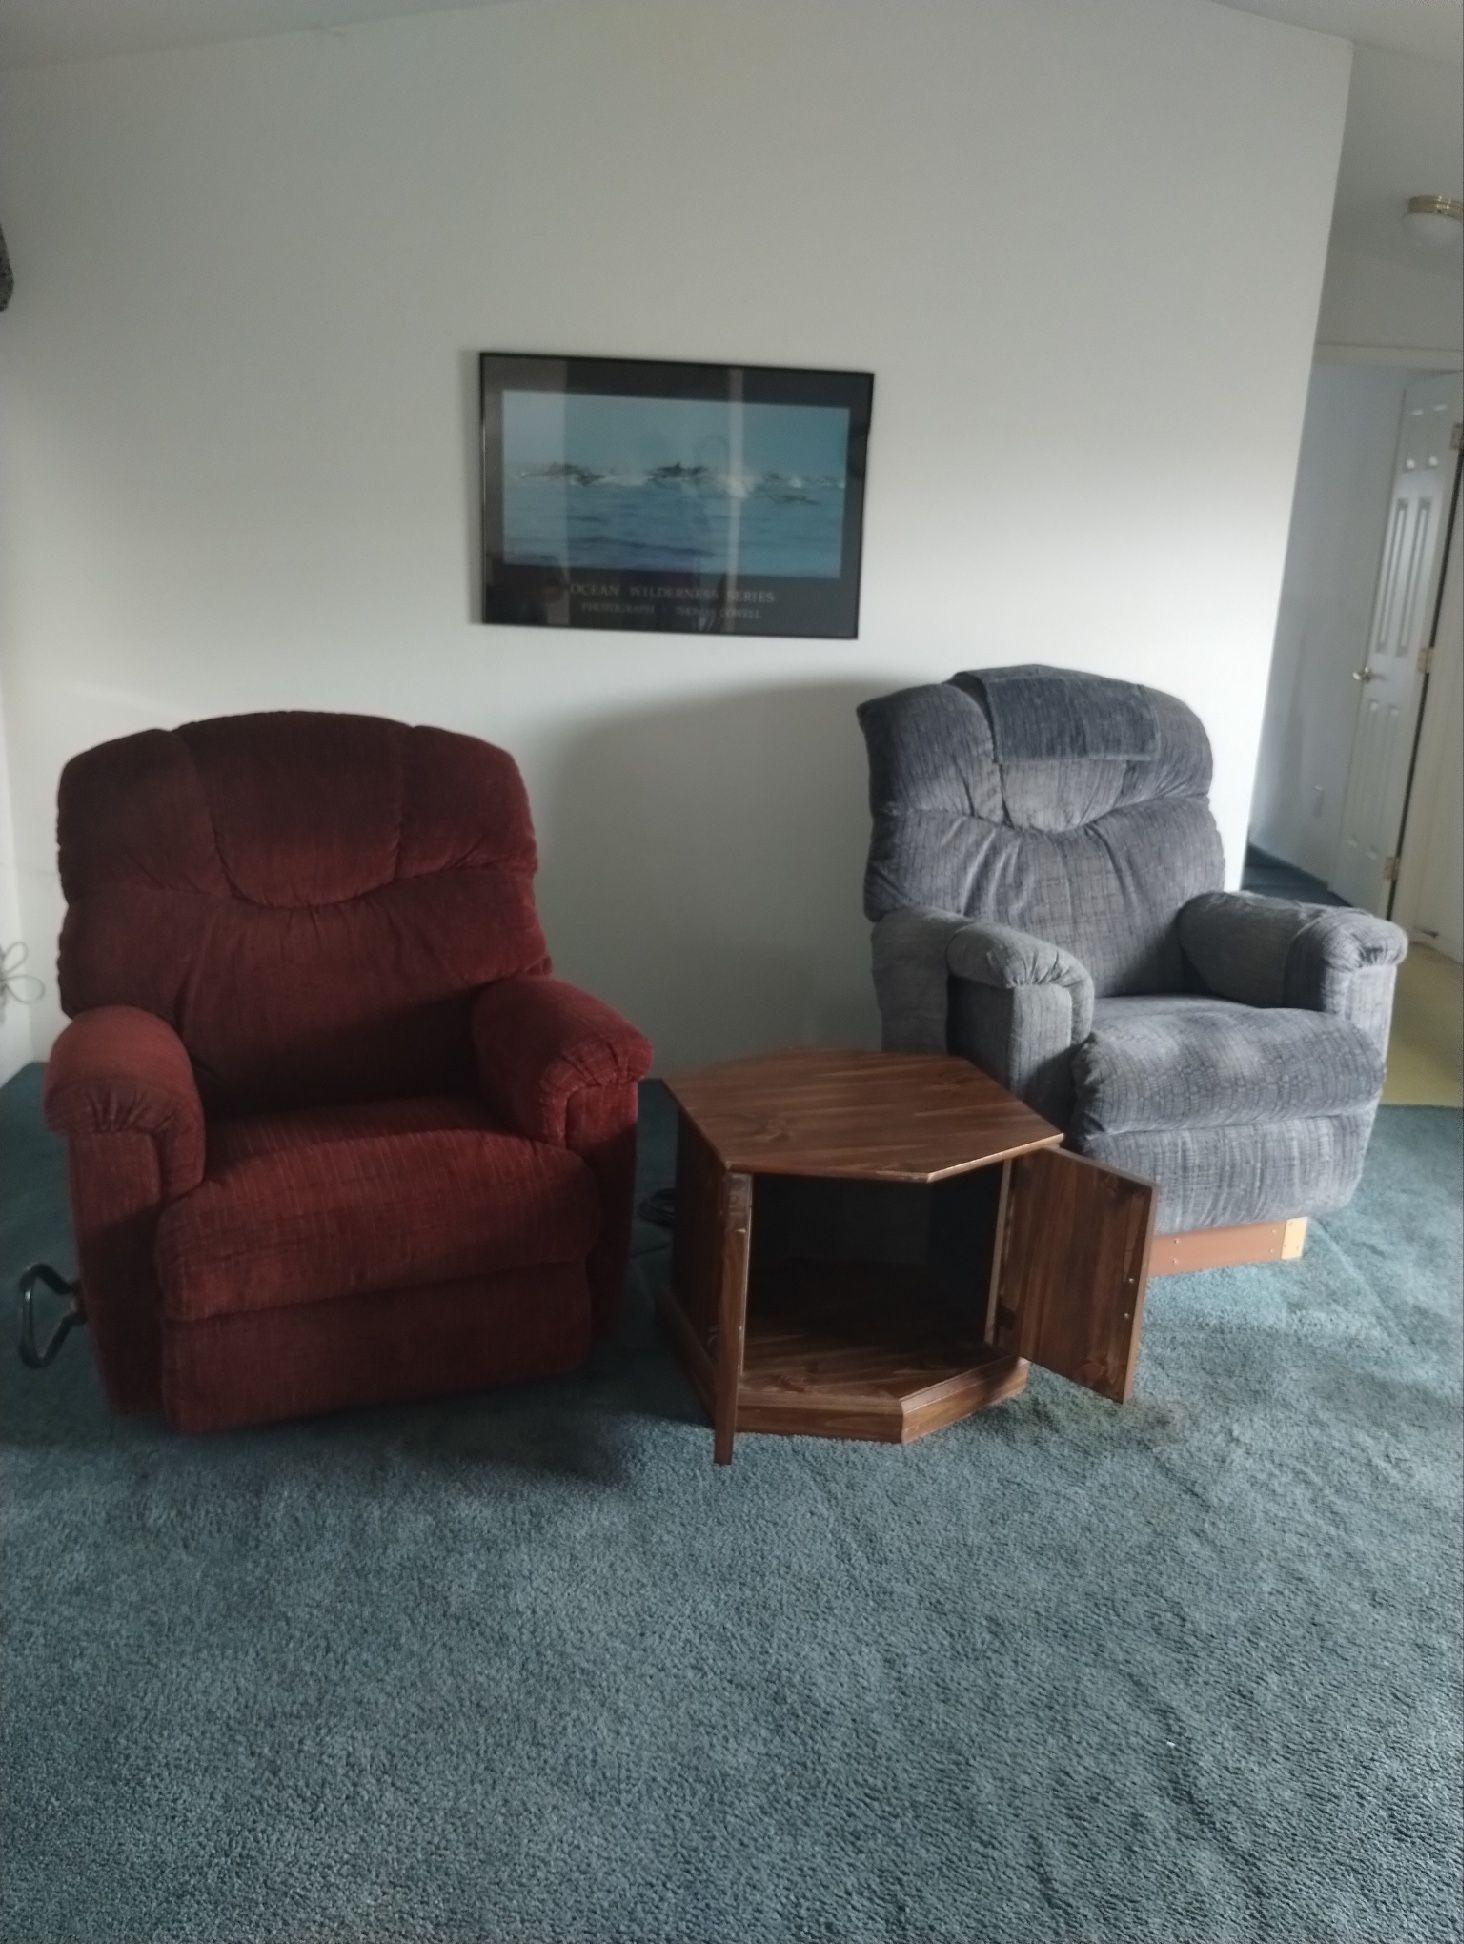 !FREE! Recliners & Table 